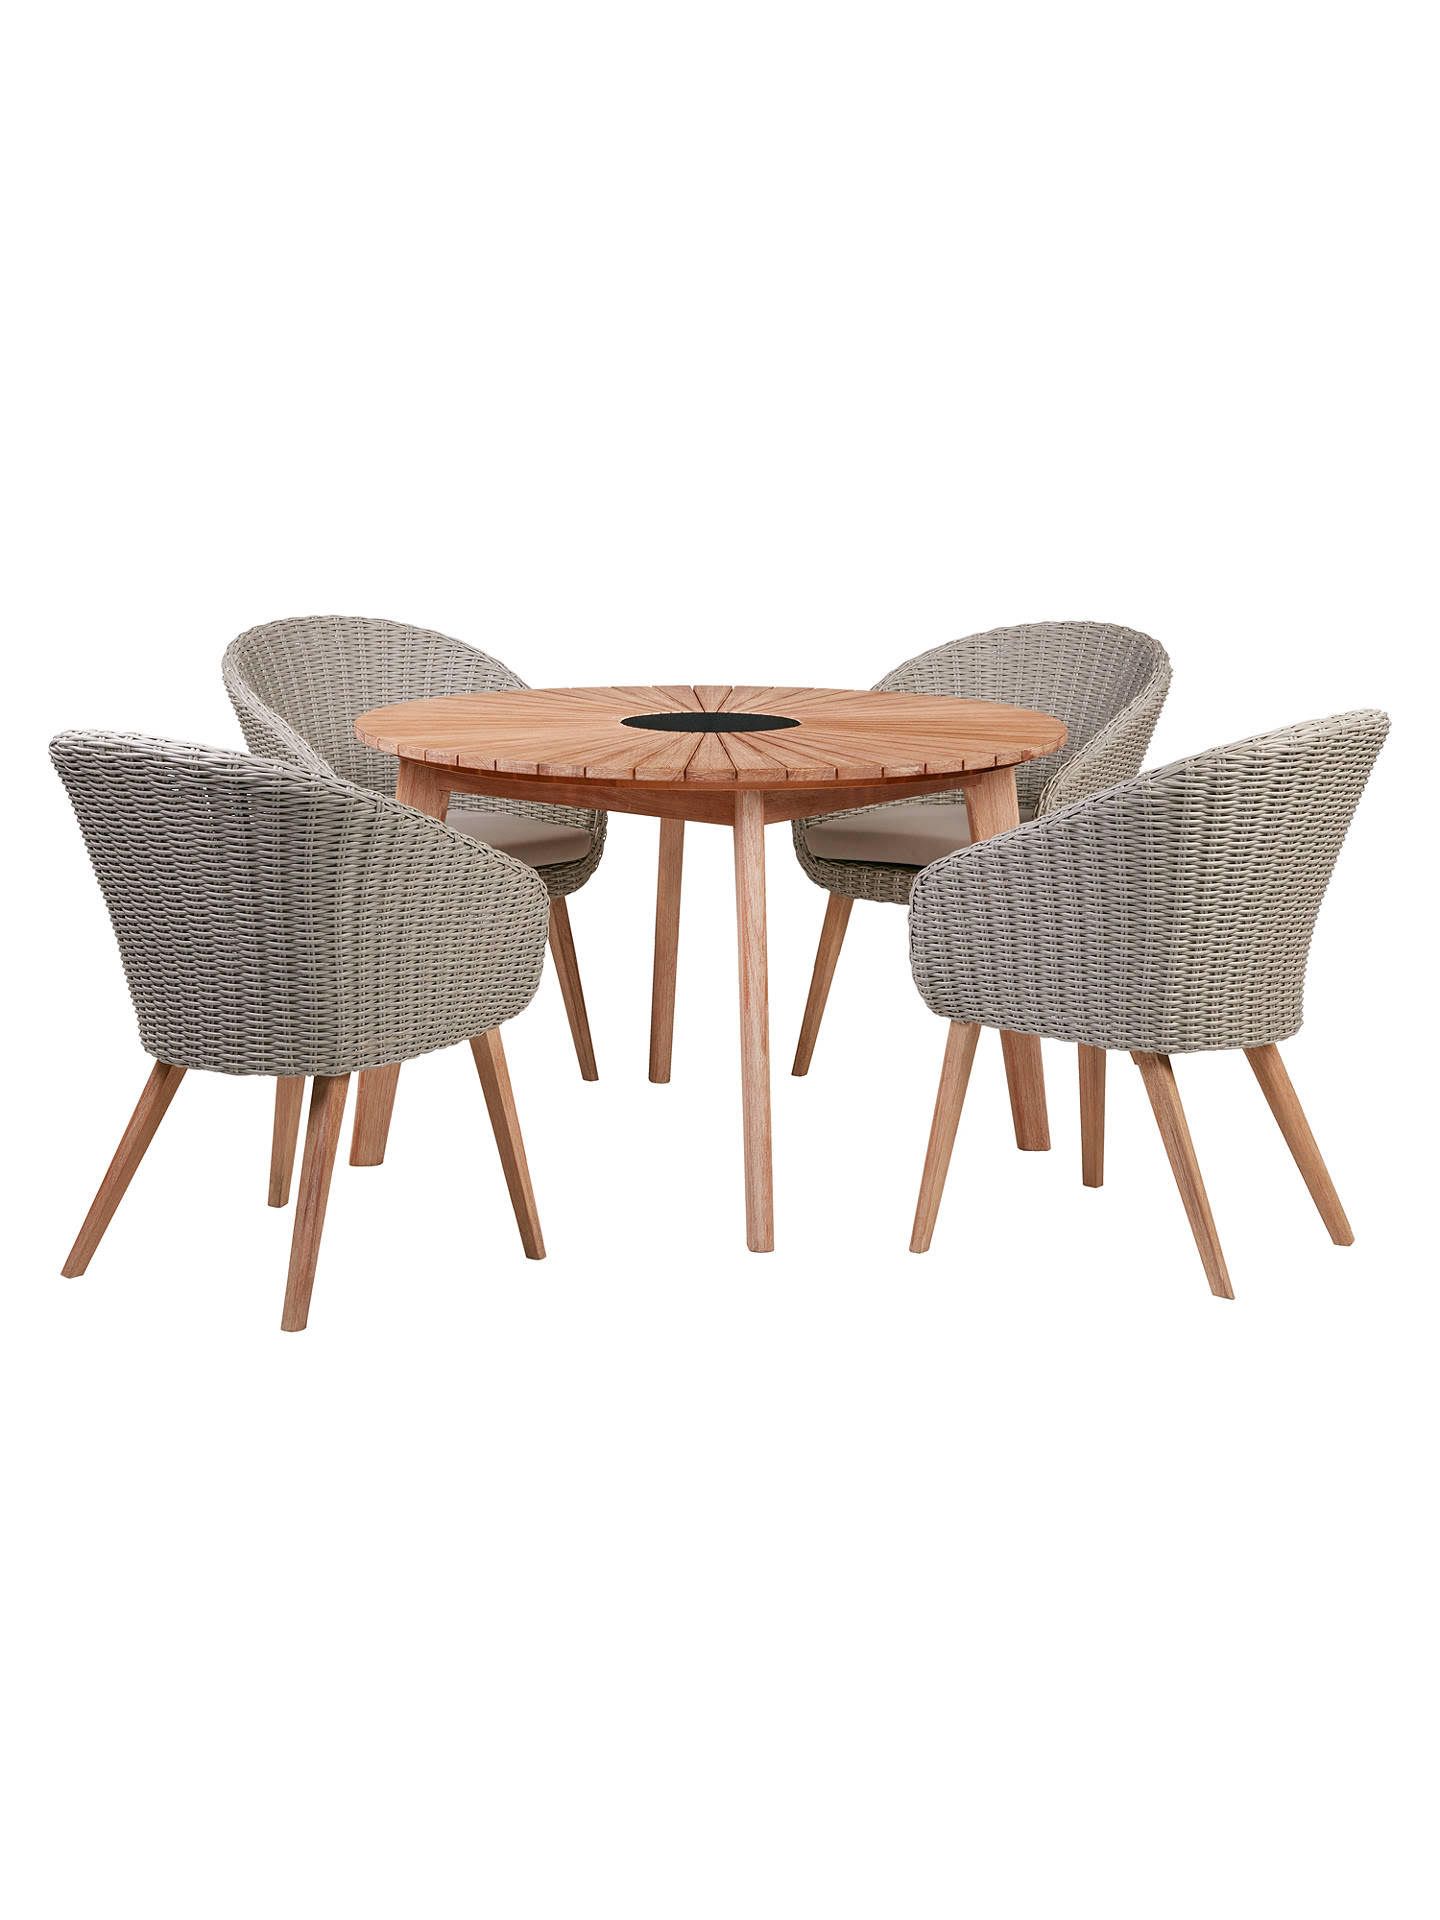 V Brand New To John Lewis Sol Four Seater Round Garden Table & Chairs ISP £999 (John Lewis) Stock - Image 2 of 6